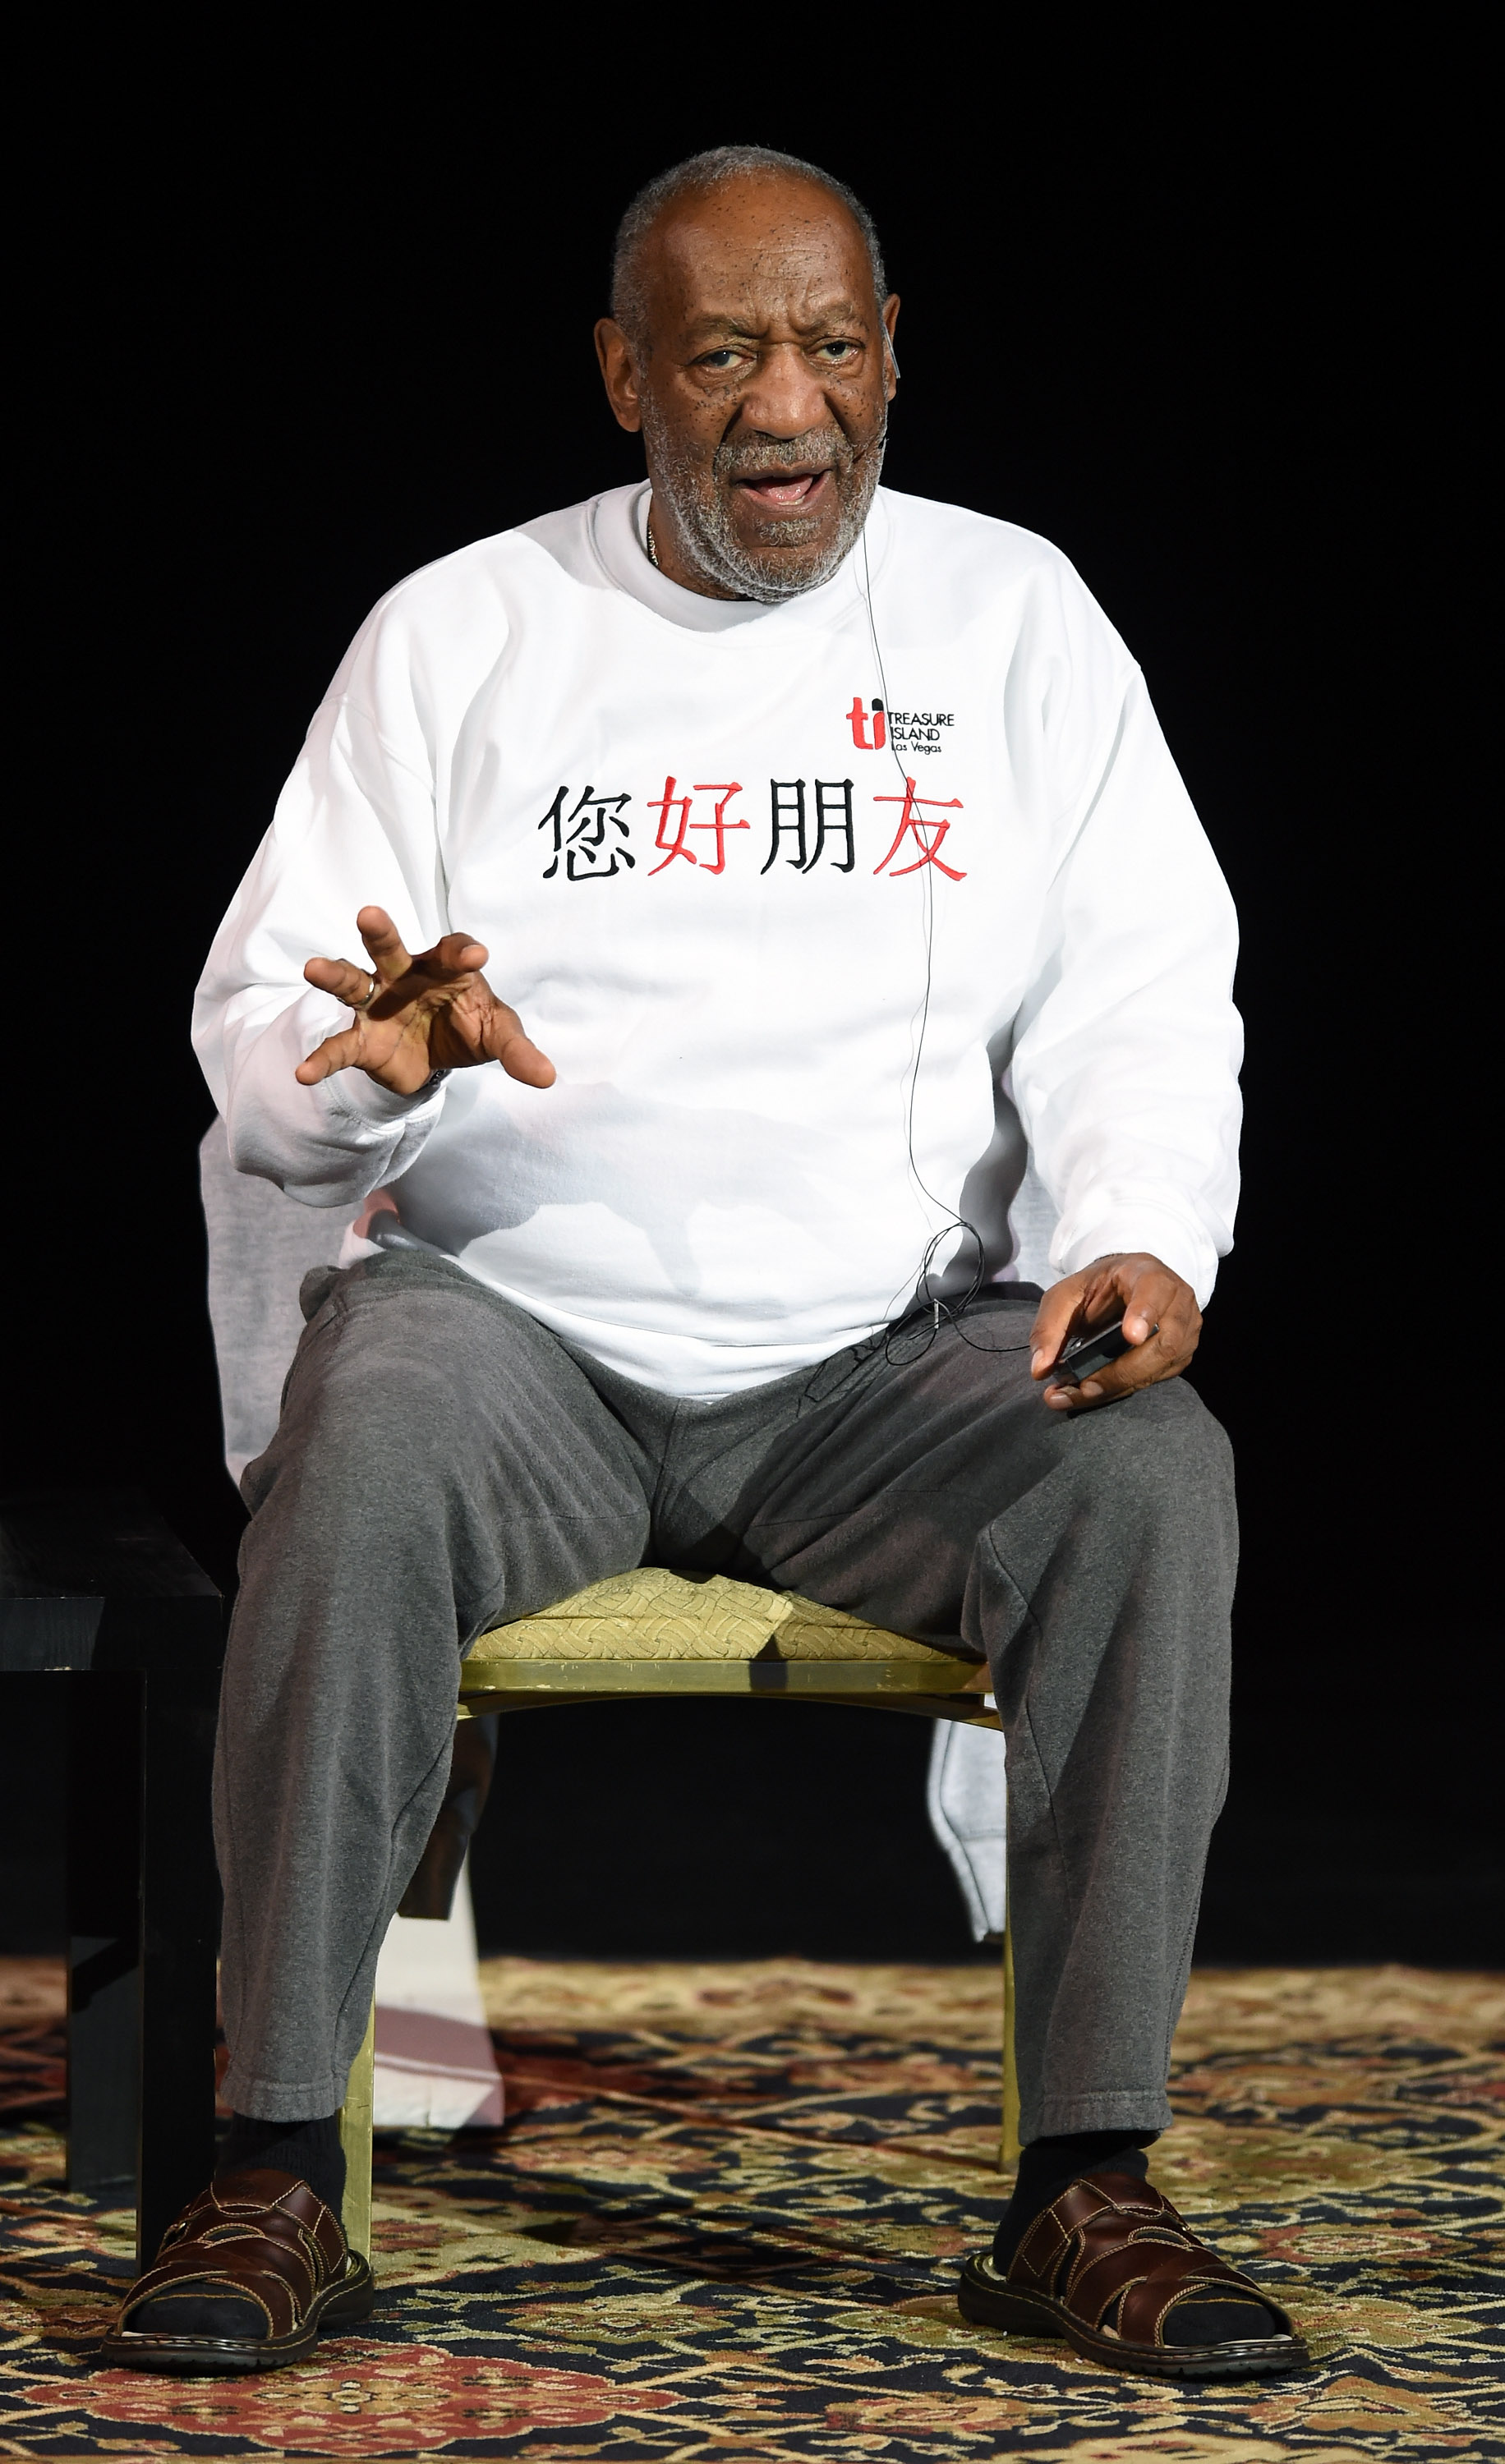 Comedian/actor Bill Cosby performs at the Treasure Island Hotel &amp; Casino on September 26, 2014 in Las Vegas, Nevada. (Ethan Miller&mdash;Getty Images)